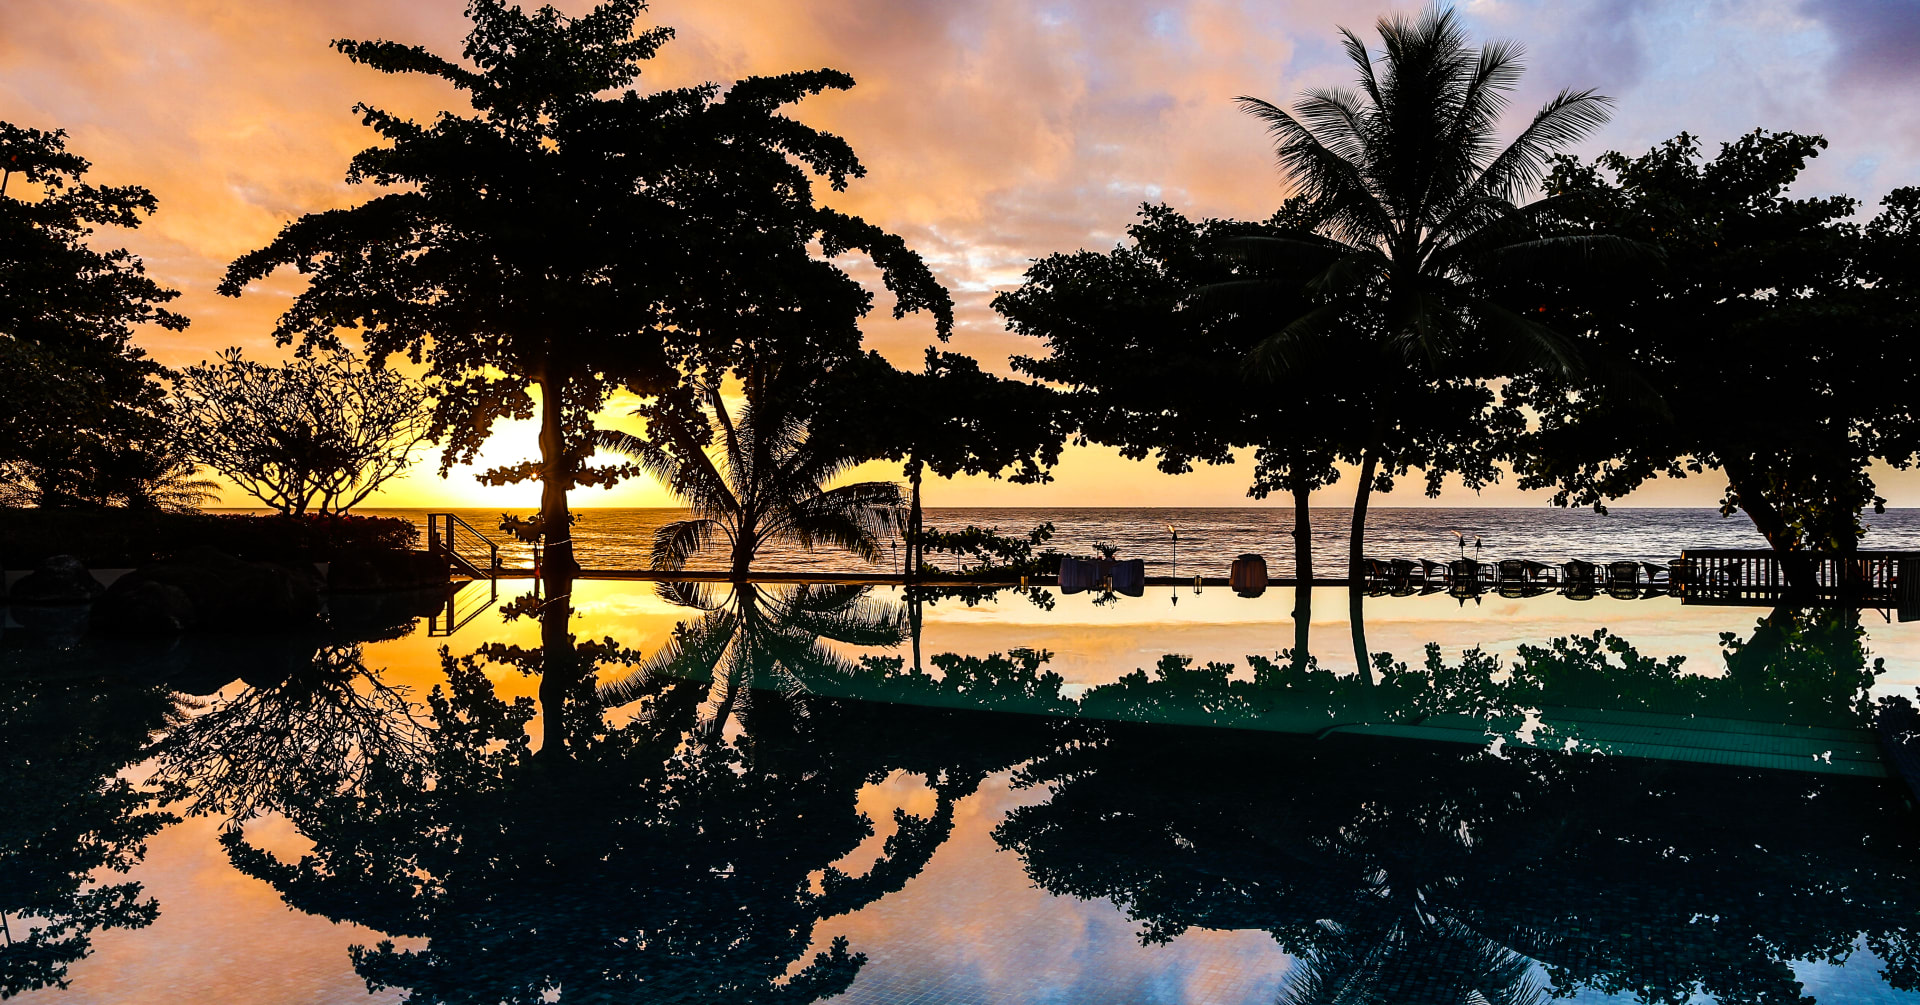 Sunset over palm trees which are reflecting onto swimming pool